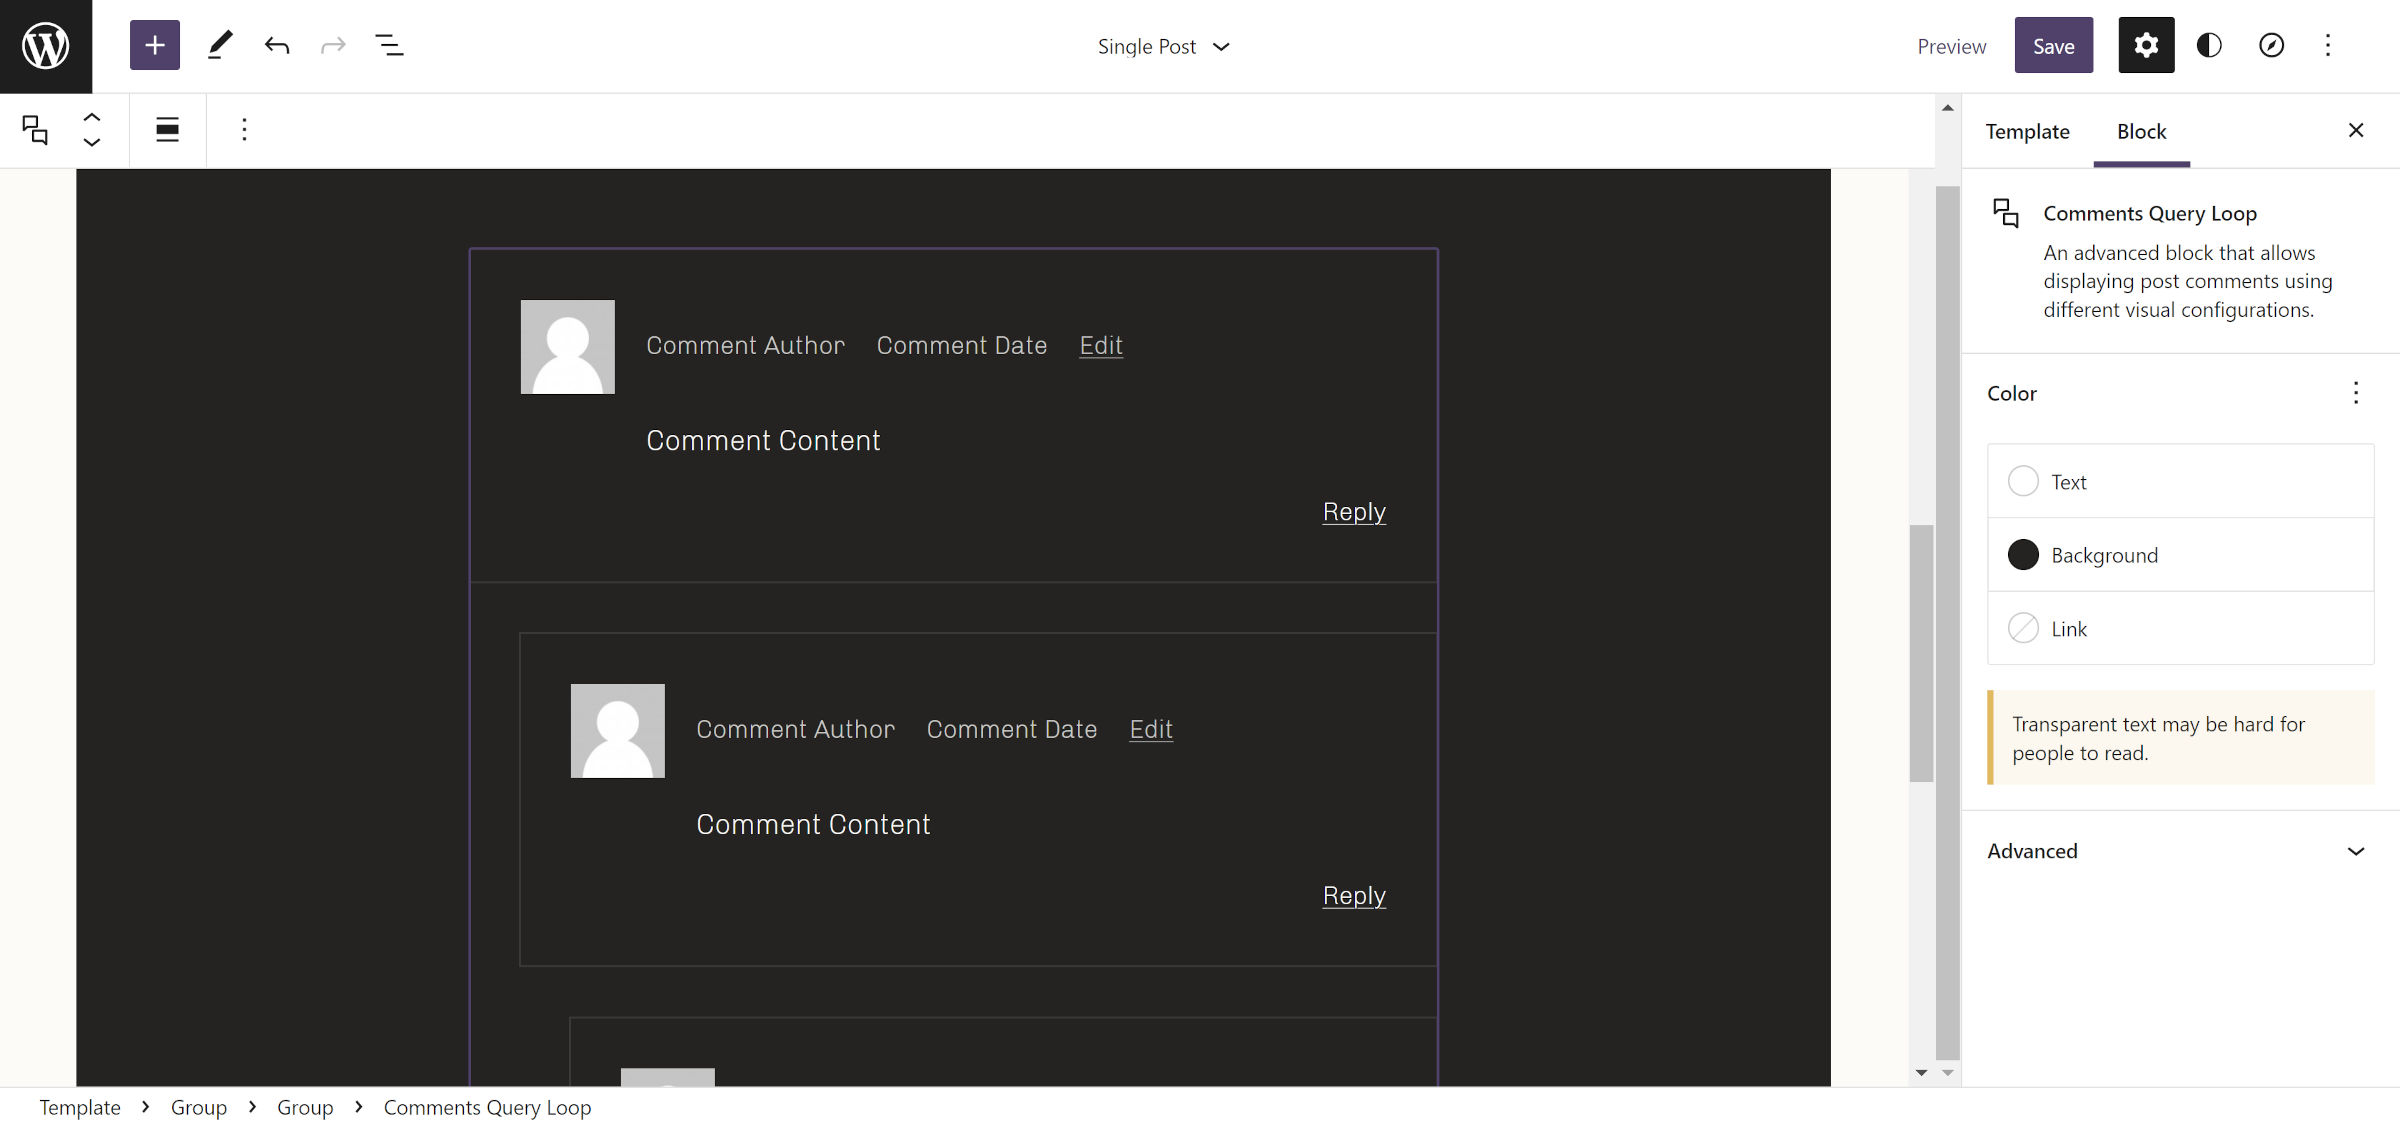 WordPress site editor with customized Comments Query Loop block, which displays a post's comments on the front end.